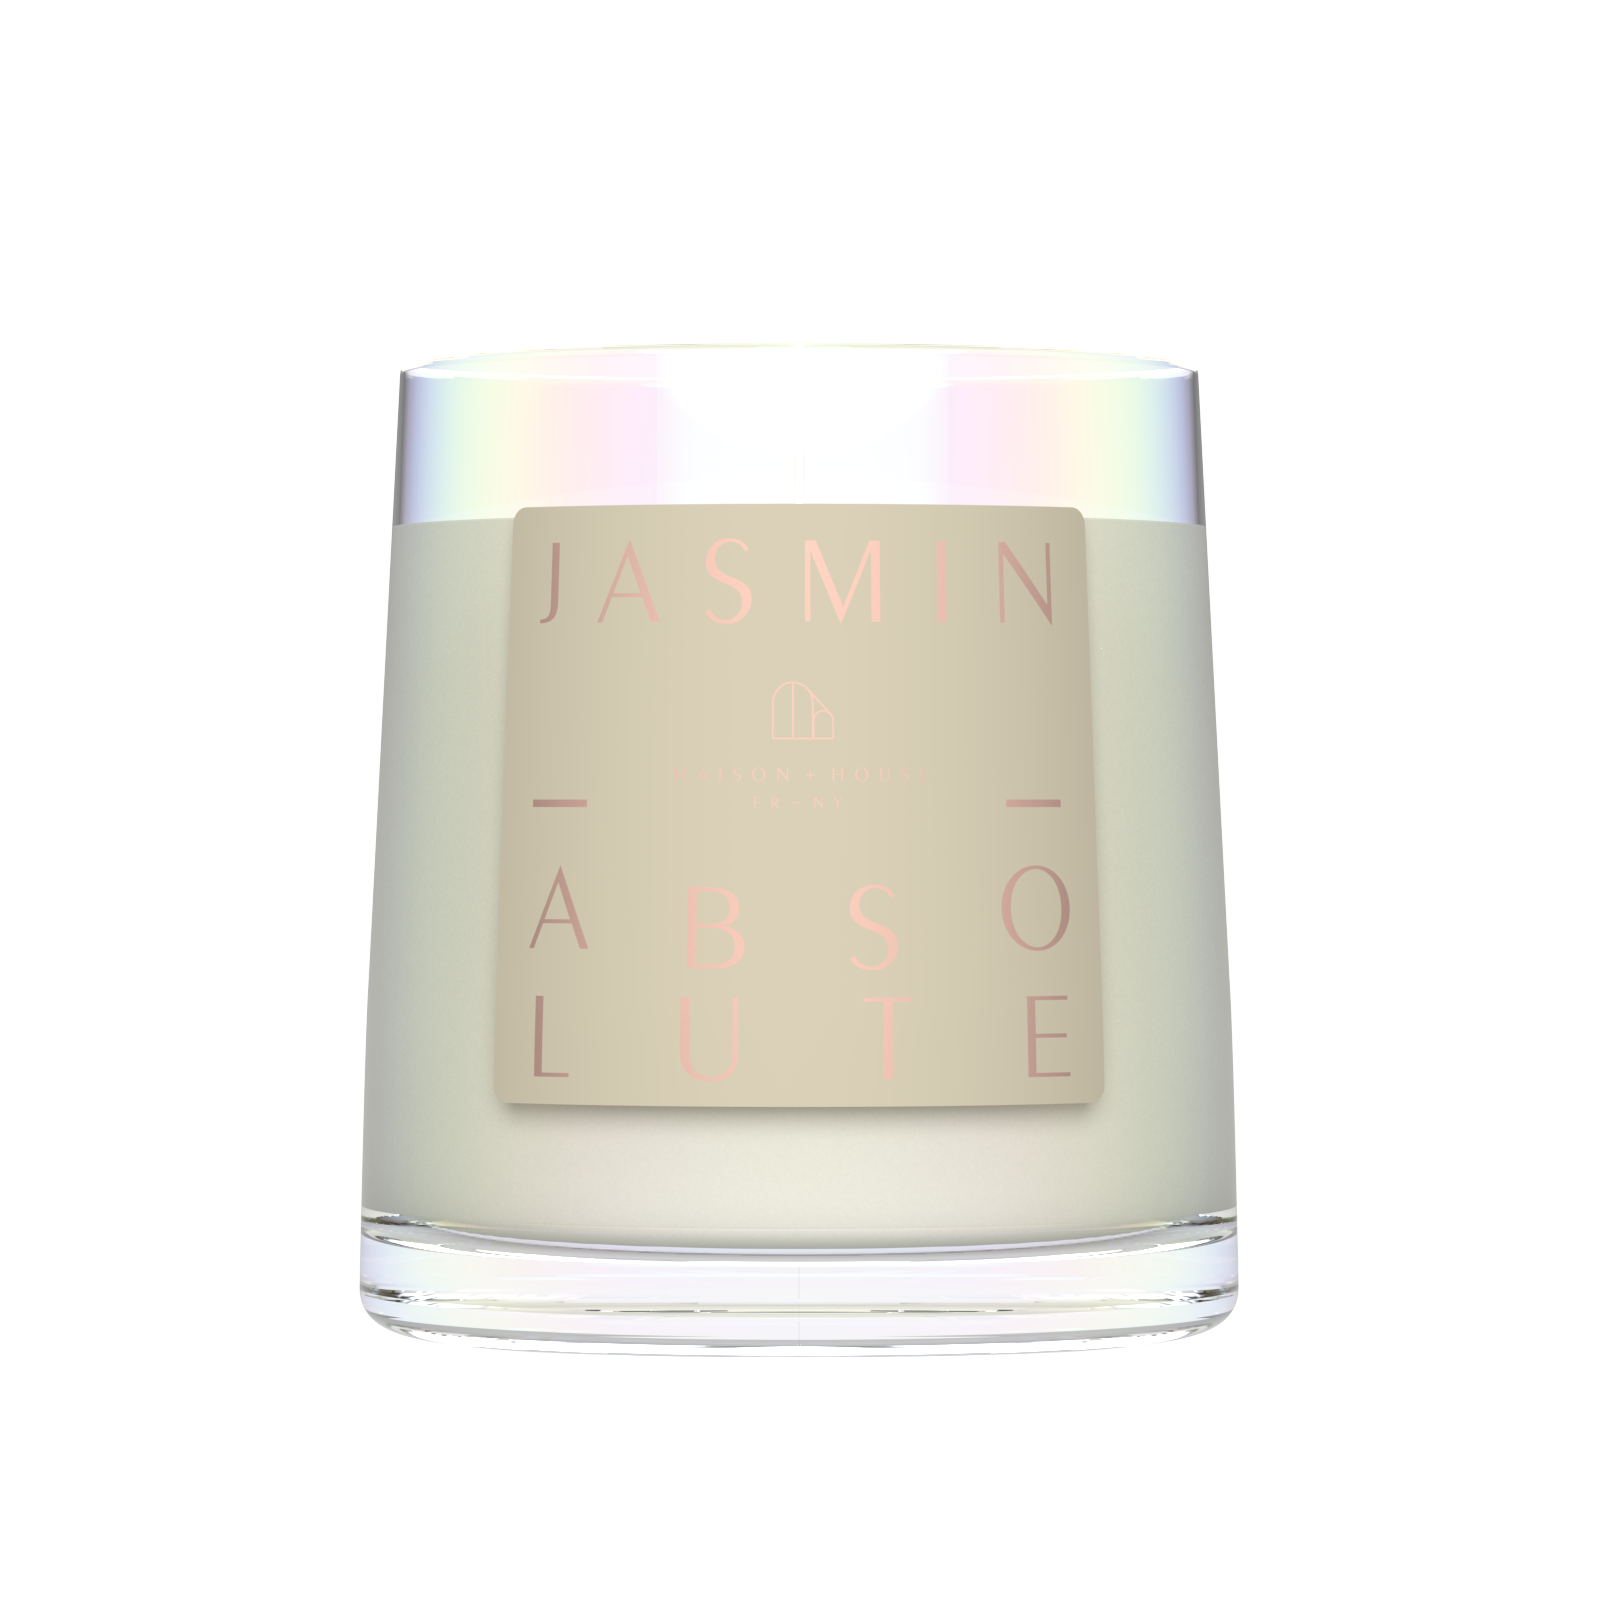 Jasmin Absolute Artisanal French-Fragrance Candle